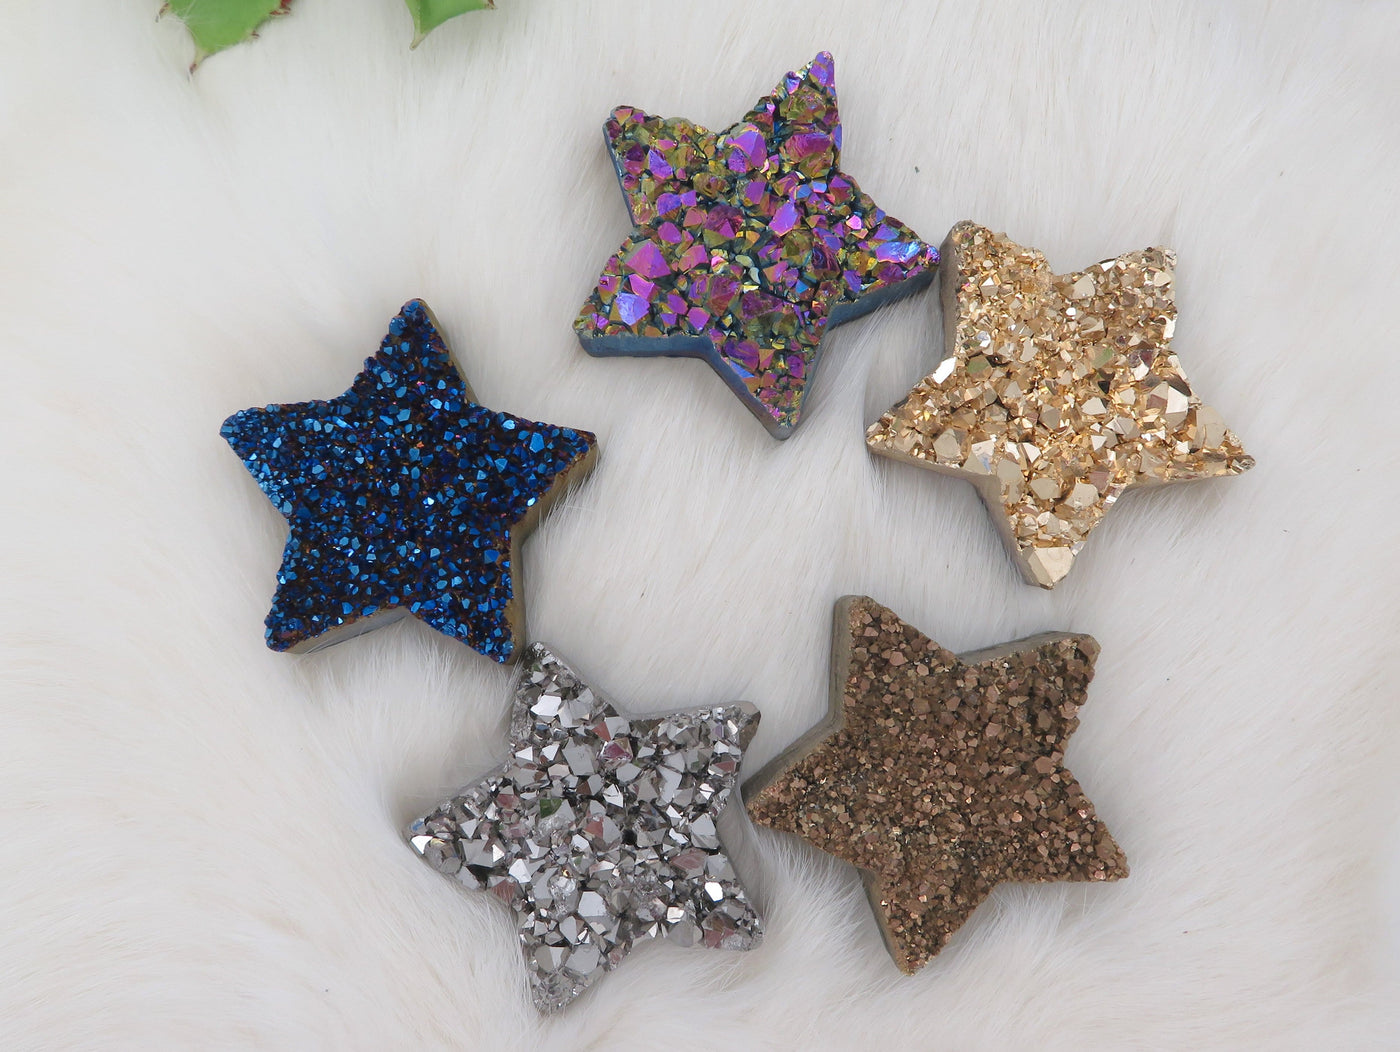 Five differently colored Titanium Treated Druzy Stars displayed on fuzzy surface.